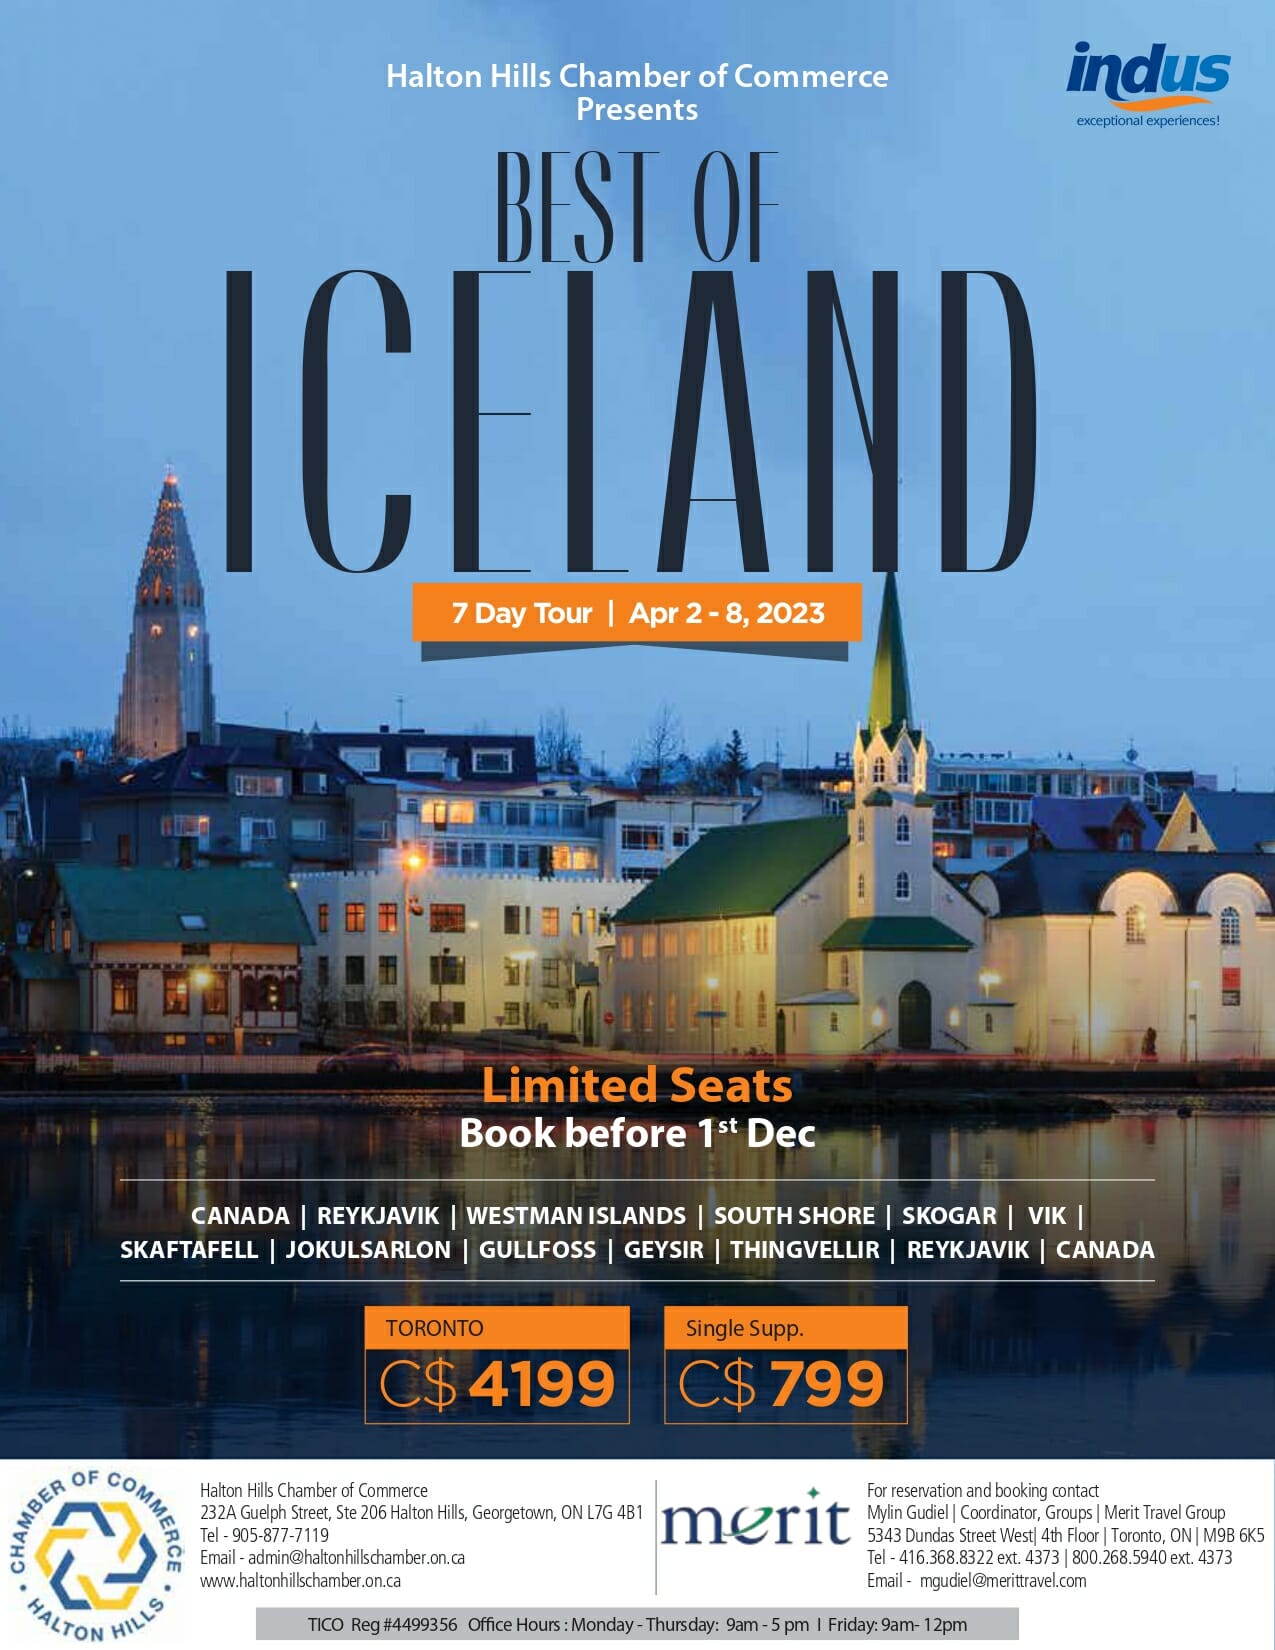 Best of Iceland 7 Day Tour - Page 1 of 3